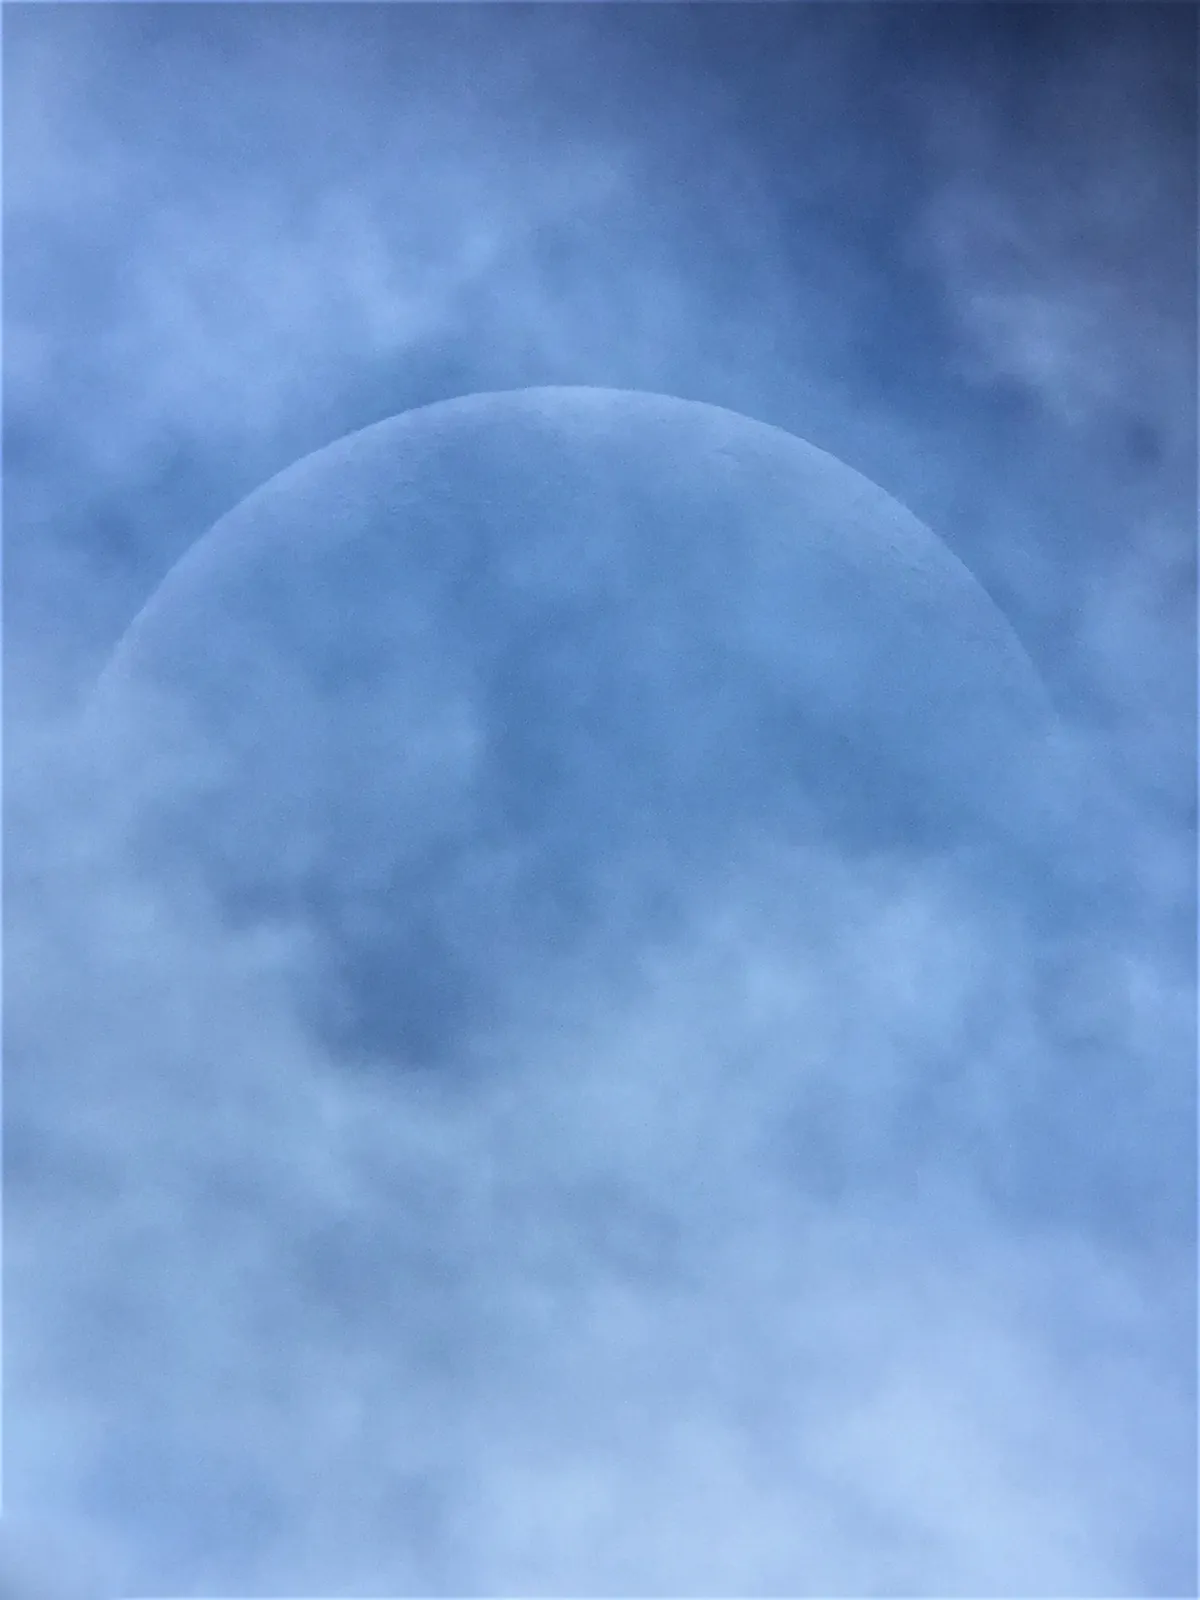 Clouds Across The Moon Casper Kentish (UK). Category: Young Astronomy Photographer of the Year. Equipment: Skywatcher 200P telescope, super 25 wide angel lens, Dobsonian mount, Apple iPad camera, 3.3mm f/2.4 lens.